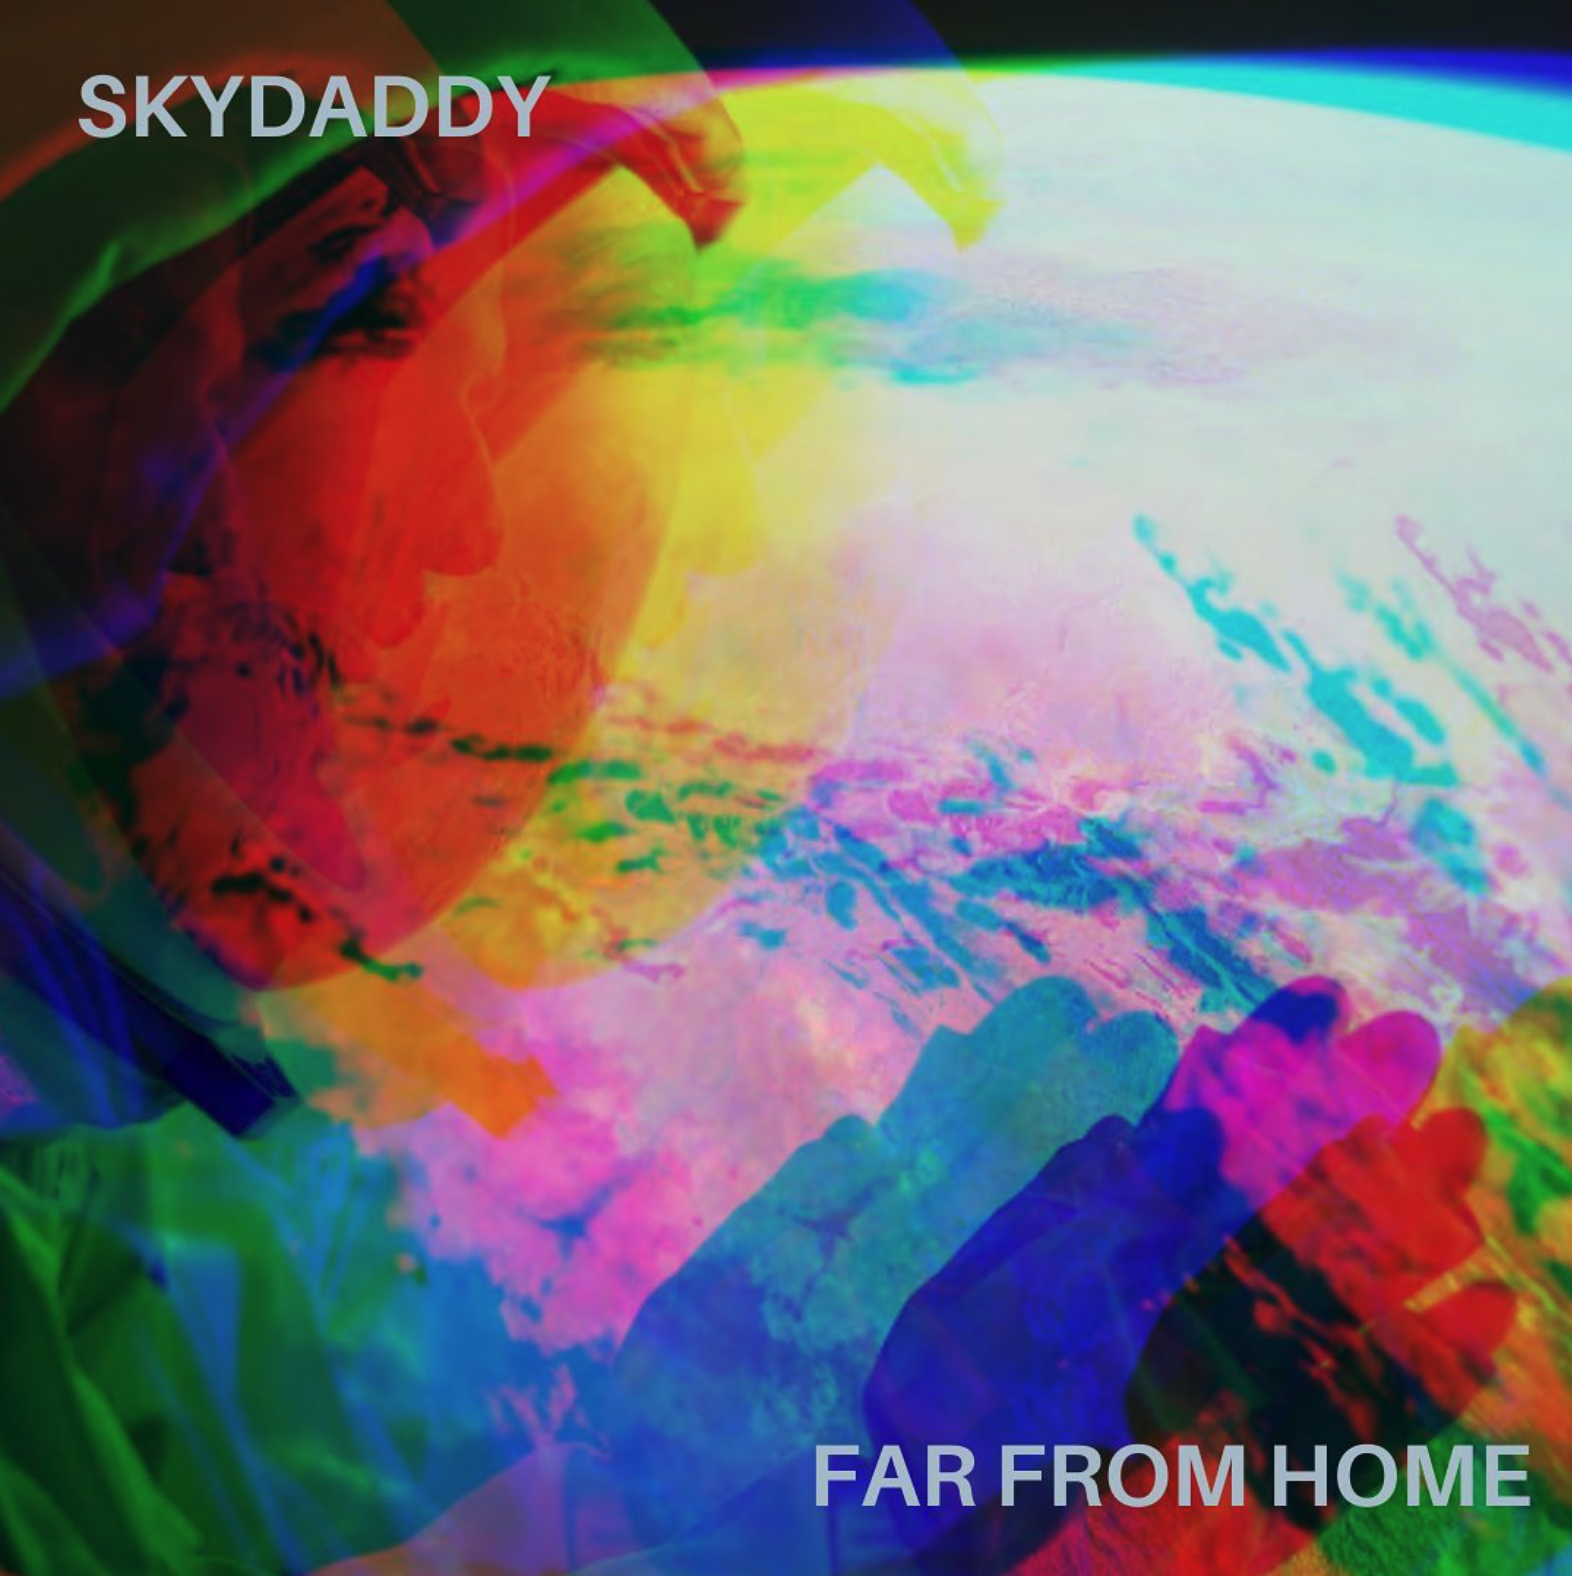 SkyDaddy publishes new singles, ‘Far From Home,’ ‘Sunshine at Night’ in 2022